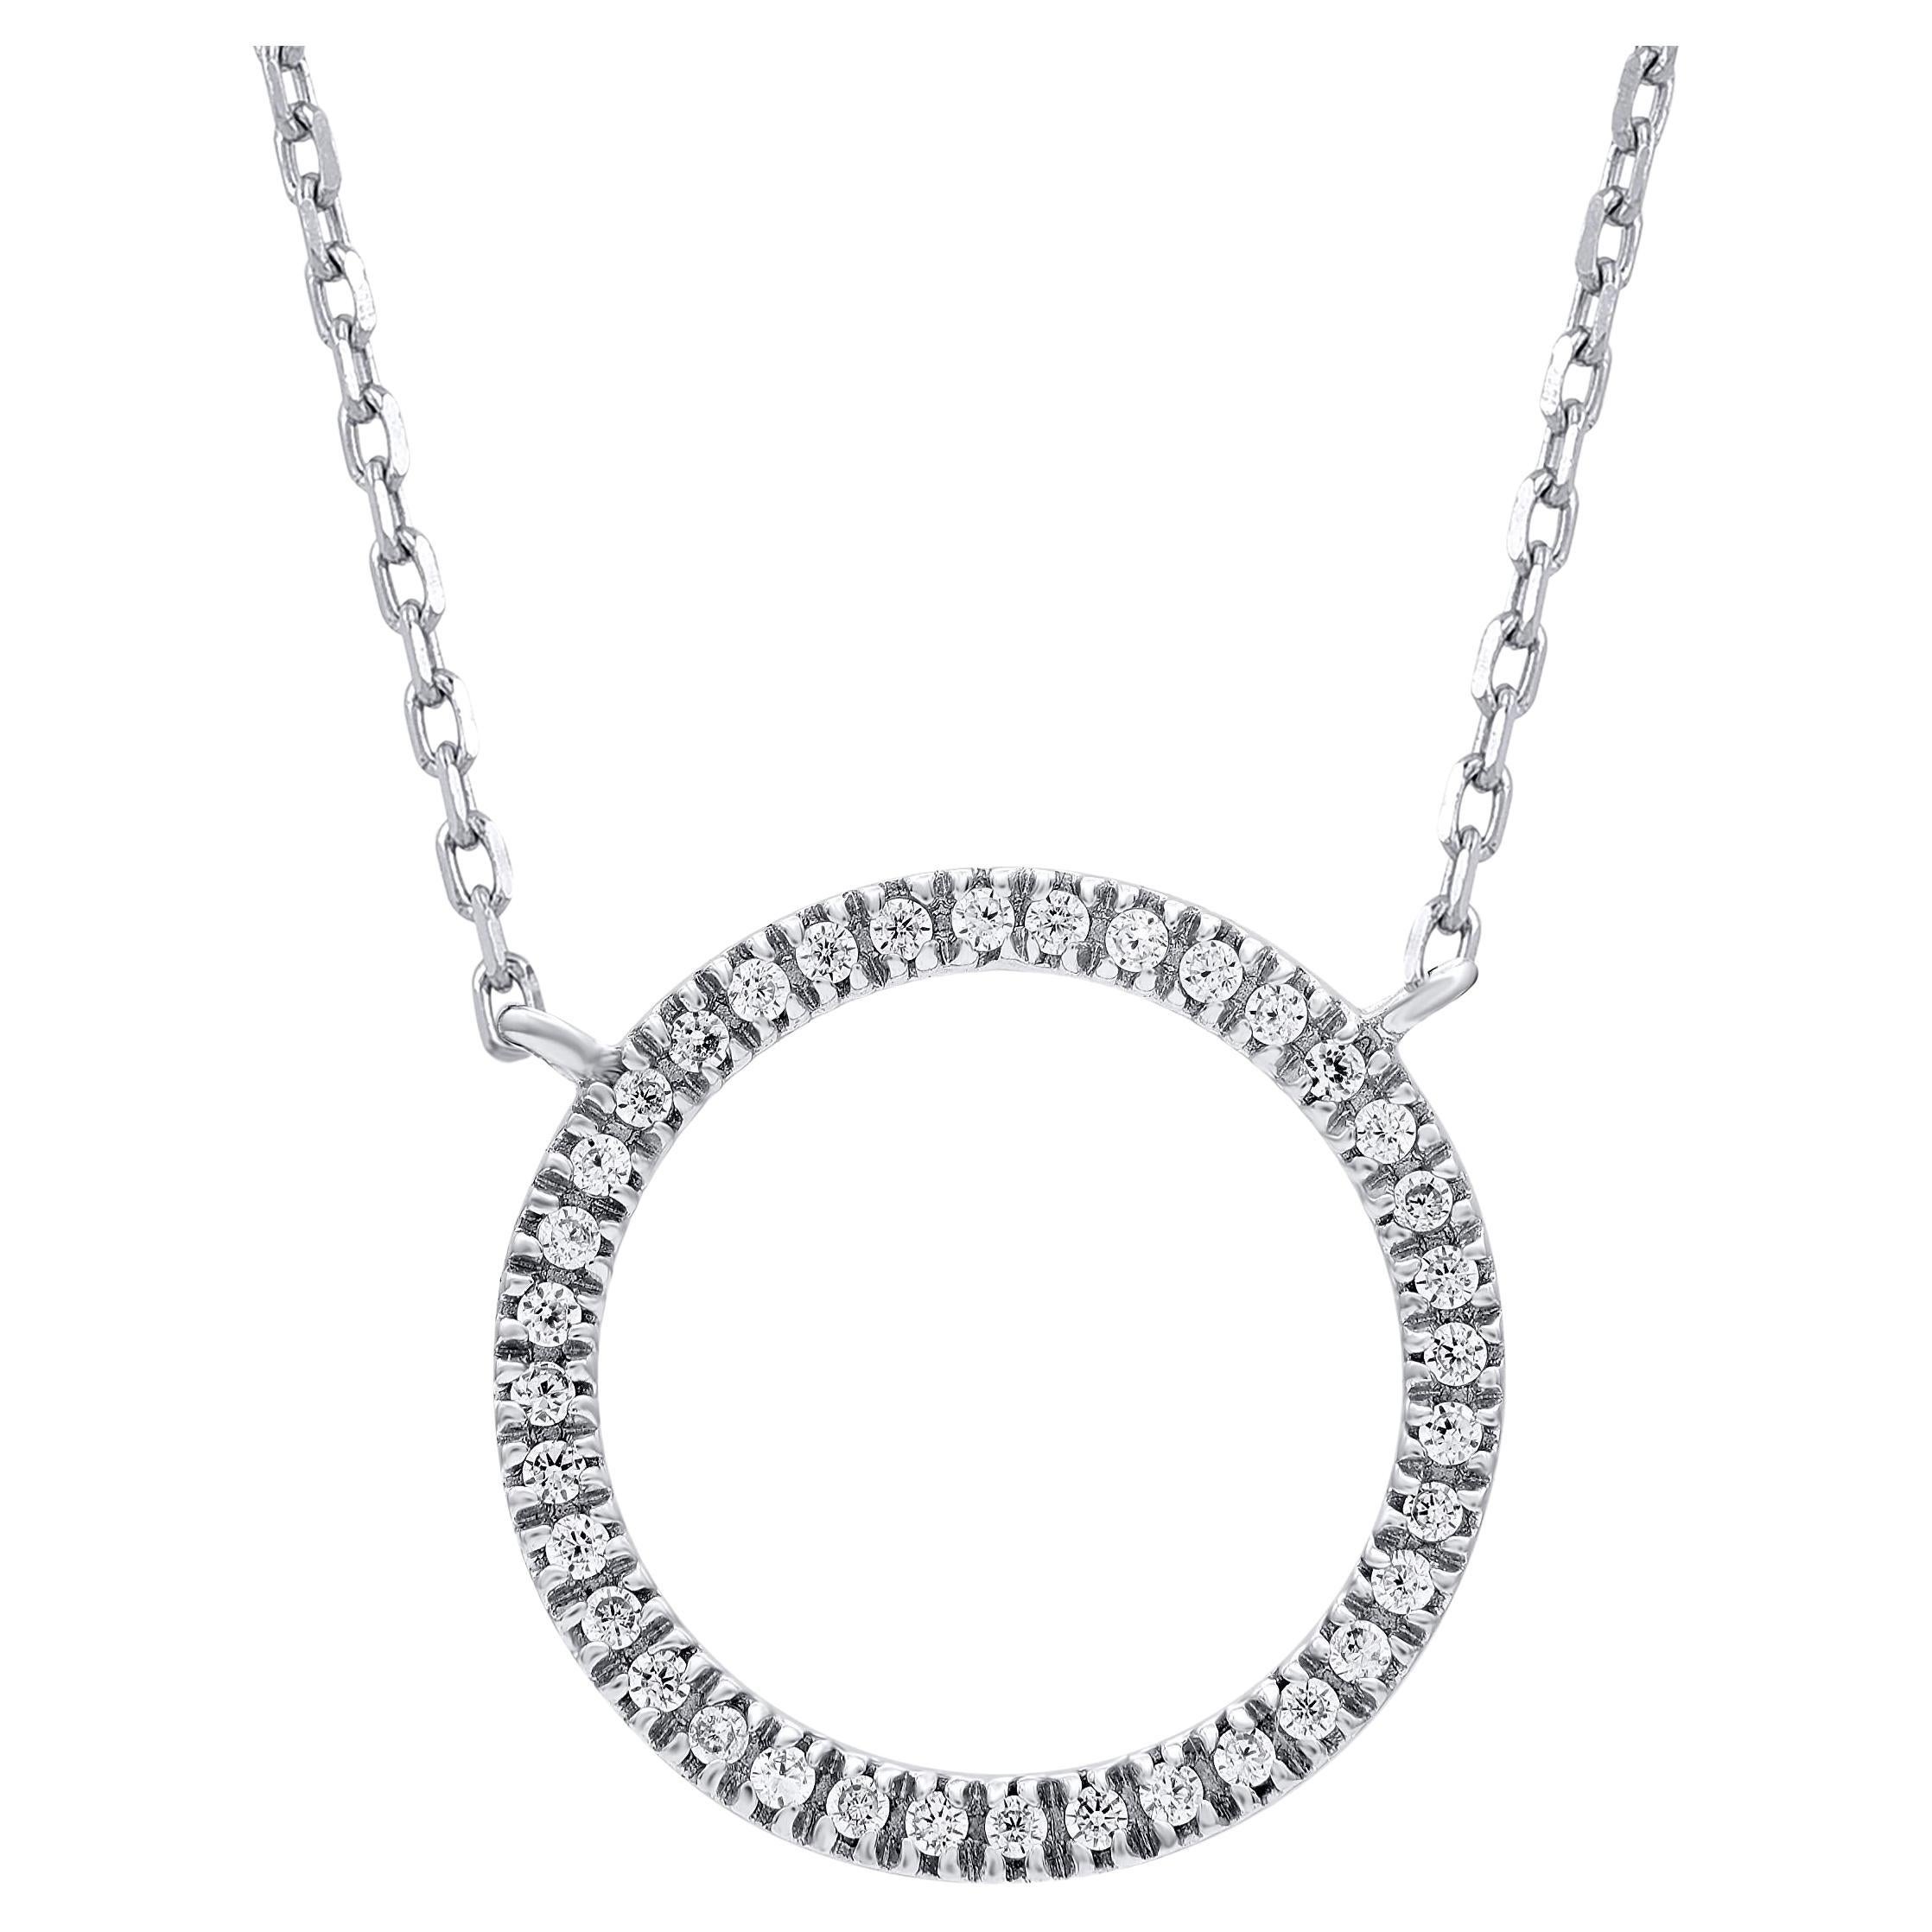 TJD 0.07 Carat Natural Round Diamond Eternity Circle Necklace in 14KT White Gold